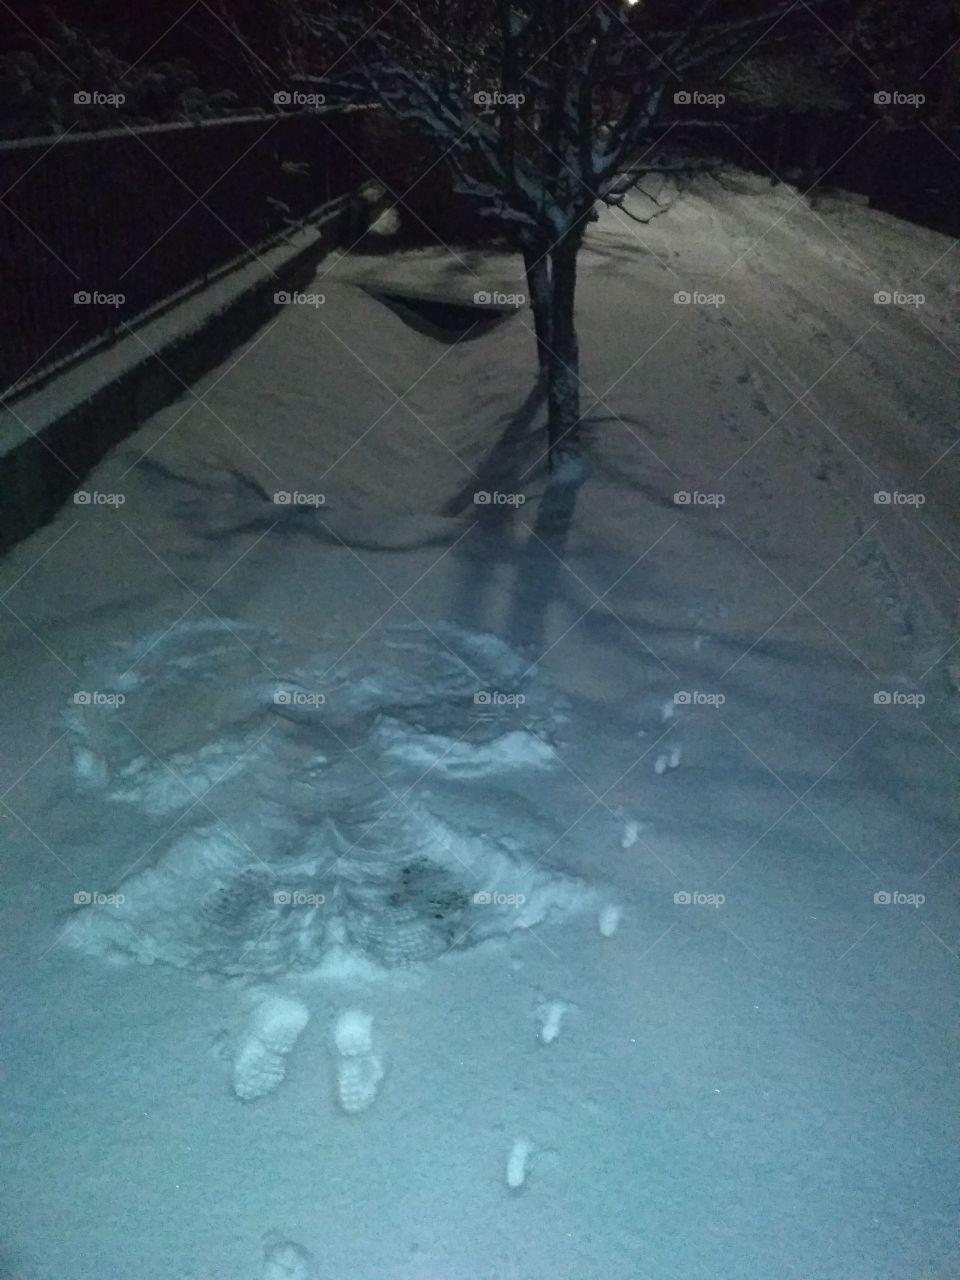 a perfect snow angel with cat footprints beside it